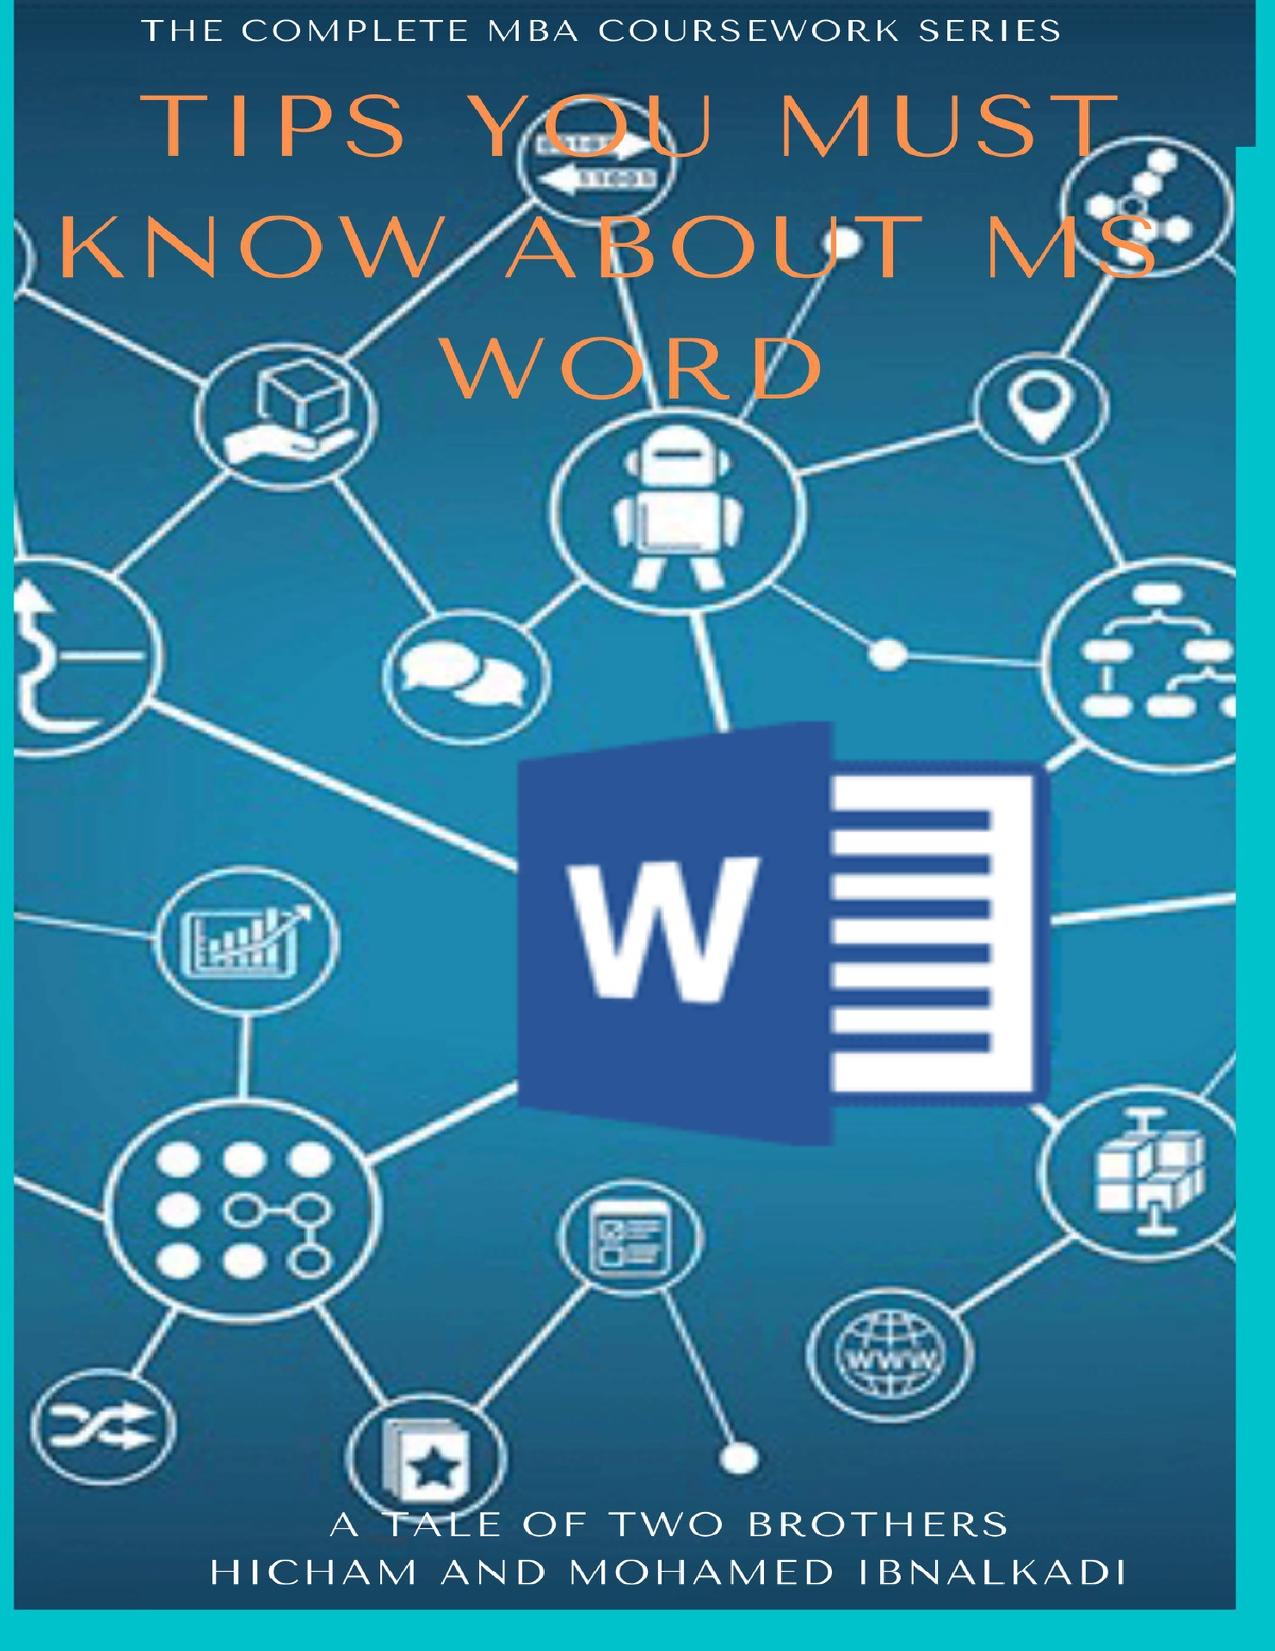 Tips You Must Know About MS Word (The Complete MBA CourseWork Series) by Ibnalkadi Hicham & Mohamed